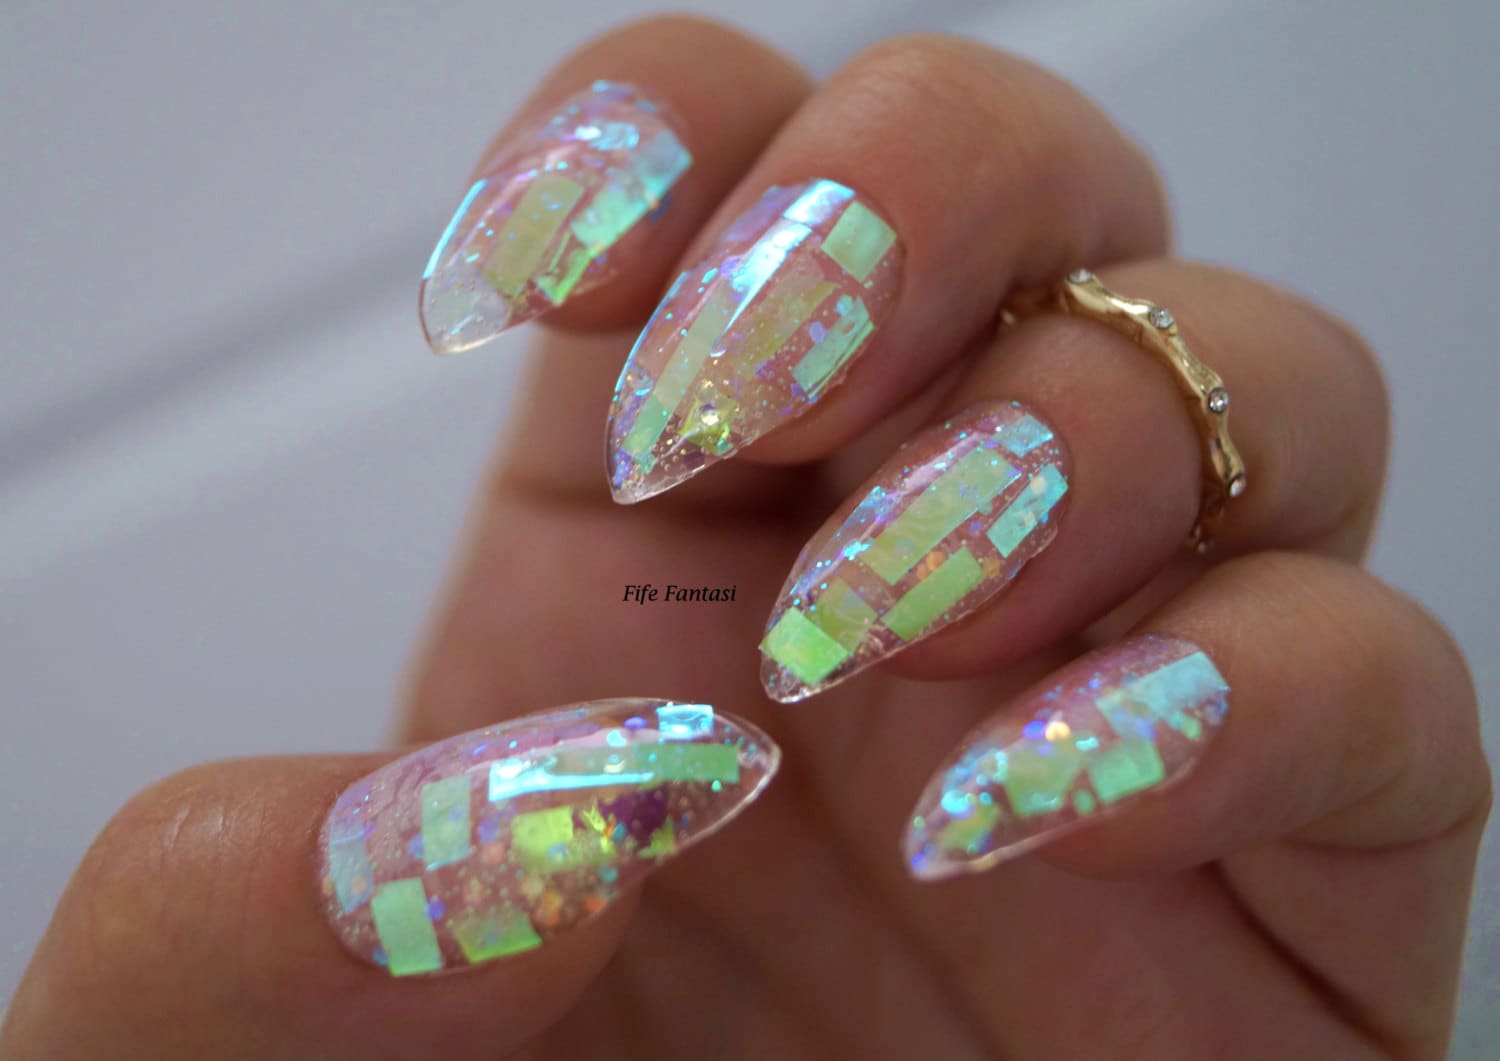 1. Stained Glass Nail Art Design - wide 2